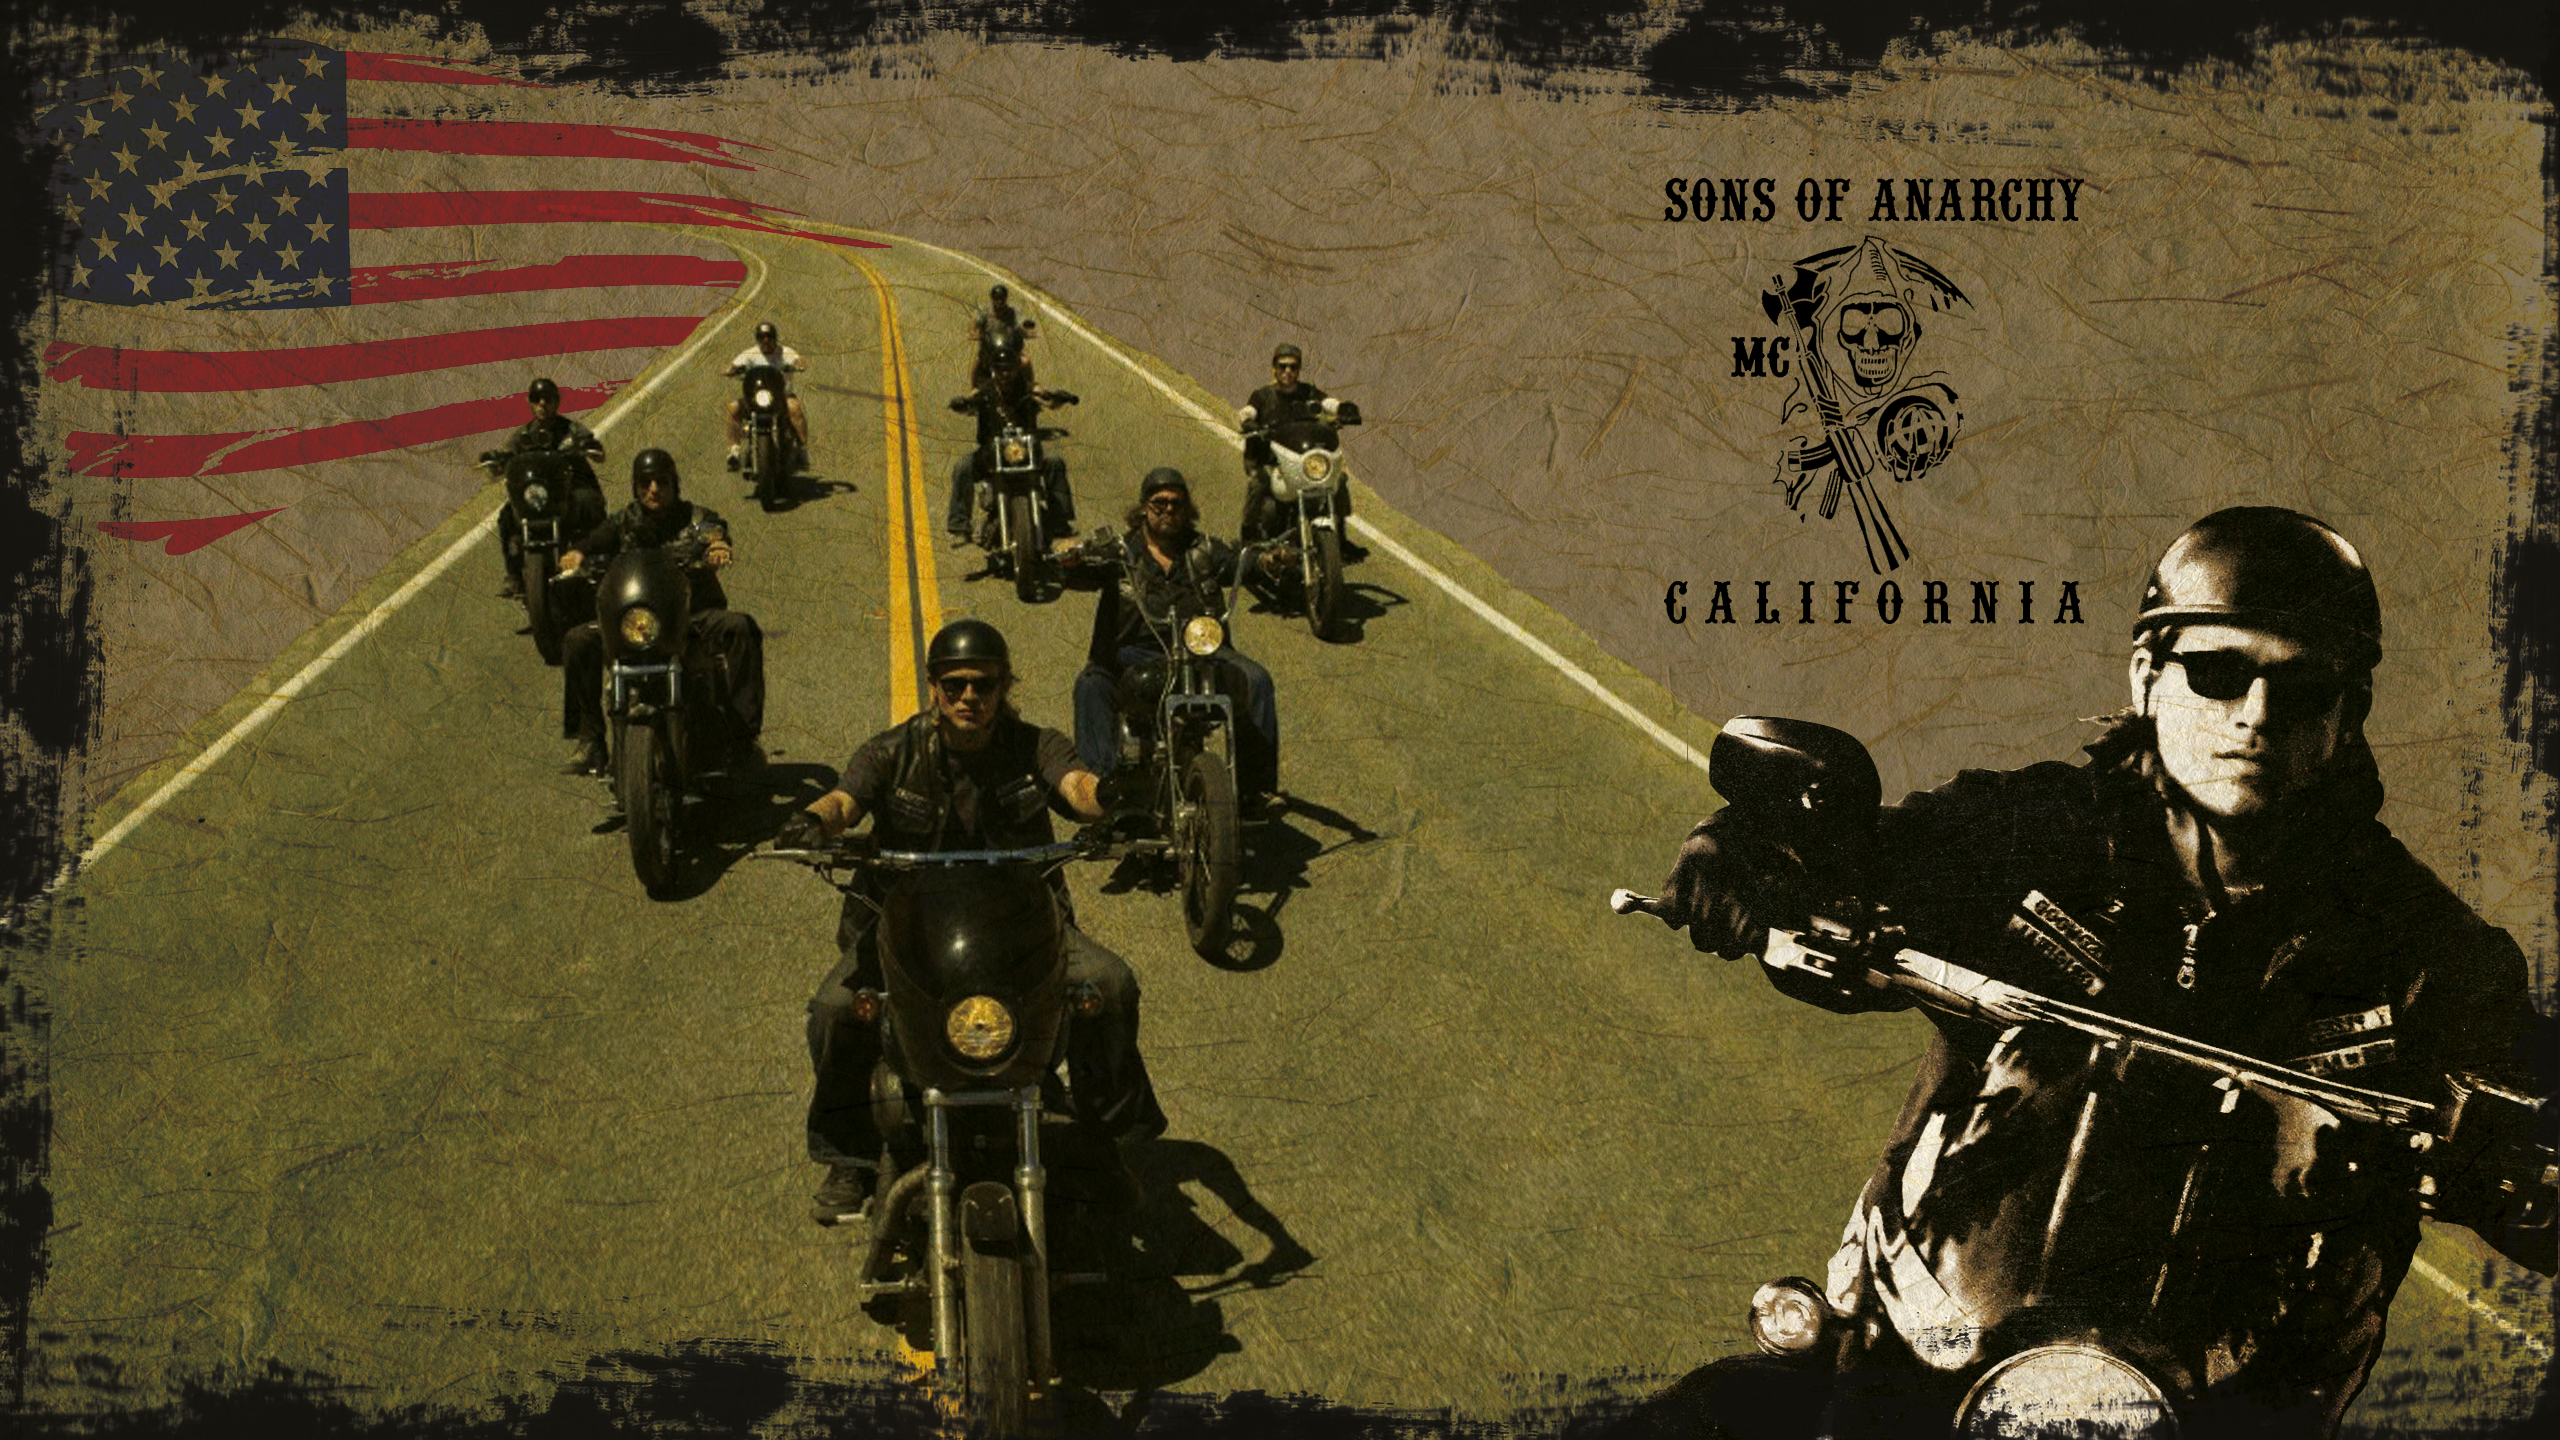 Sons Of Anarchy Wallpaper On The Road By Beaware8